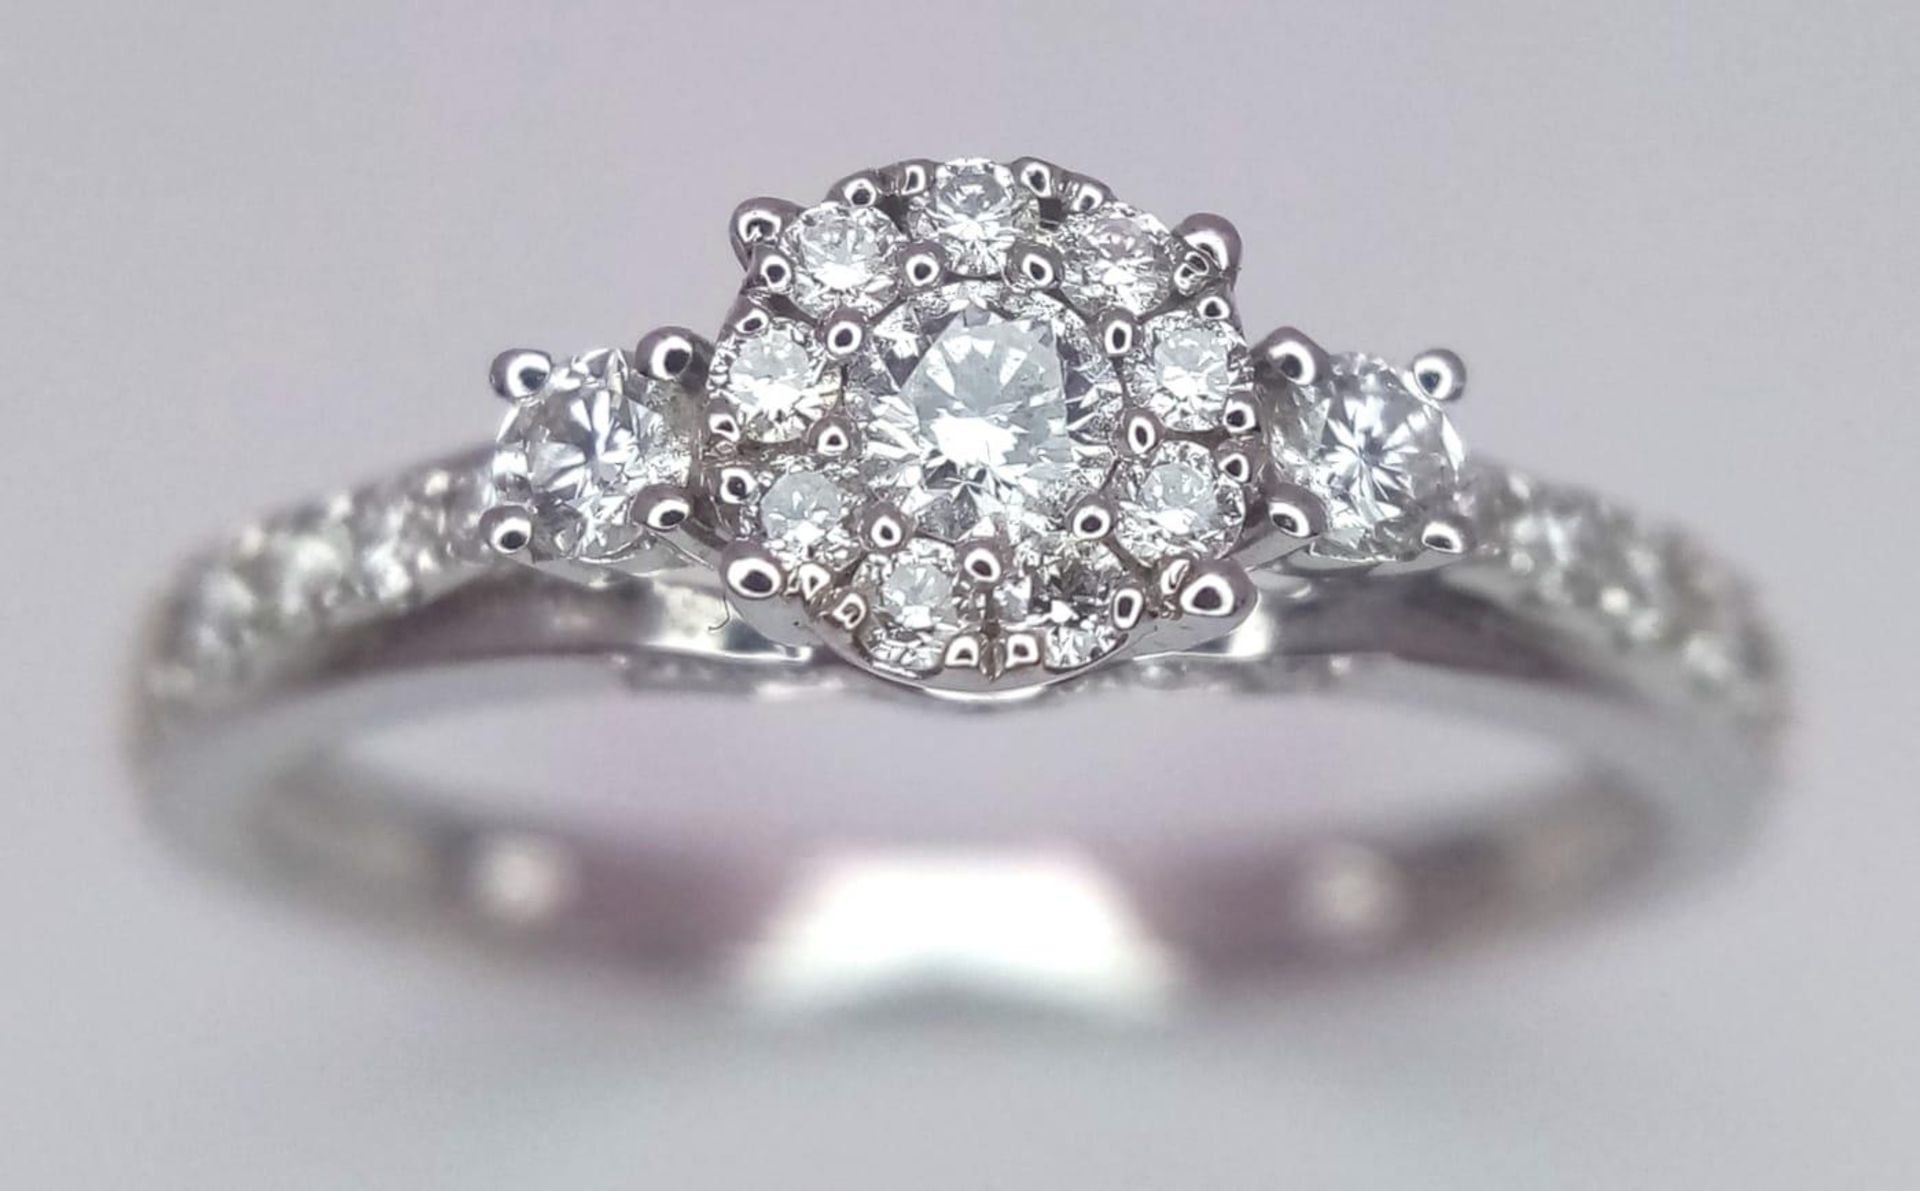 A 9 K white gold ring with a diamond cluster and more diamonds on the shoulders (total 0.41 carats), - Image 2 of 8